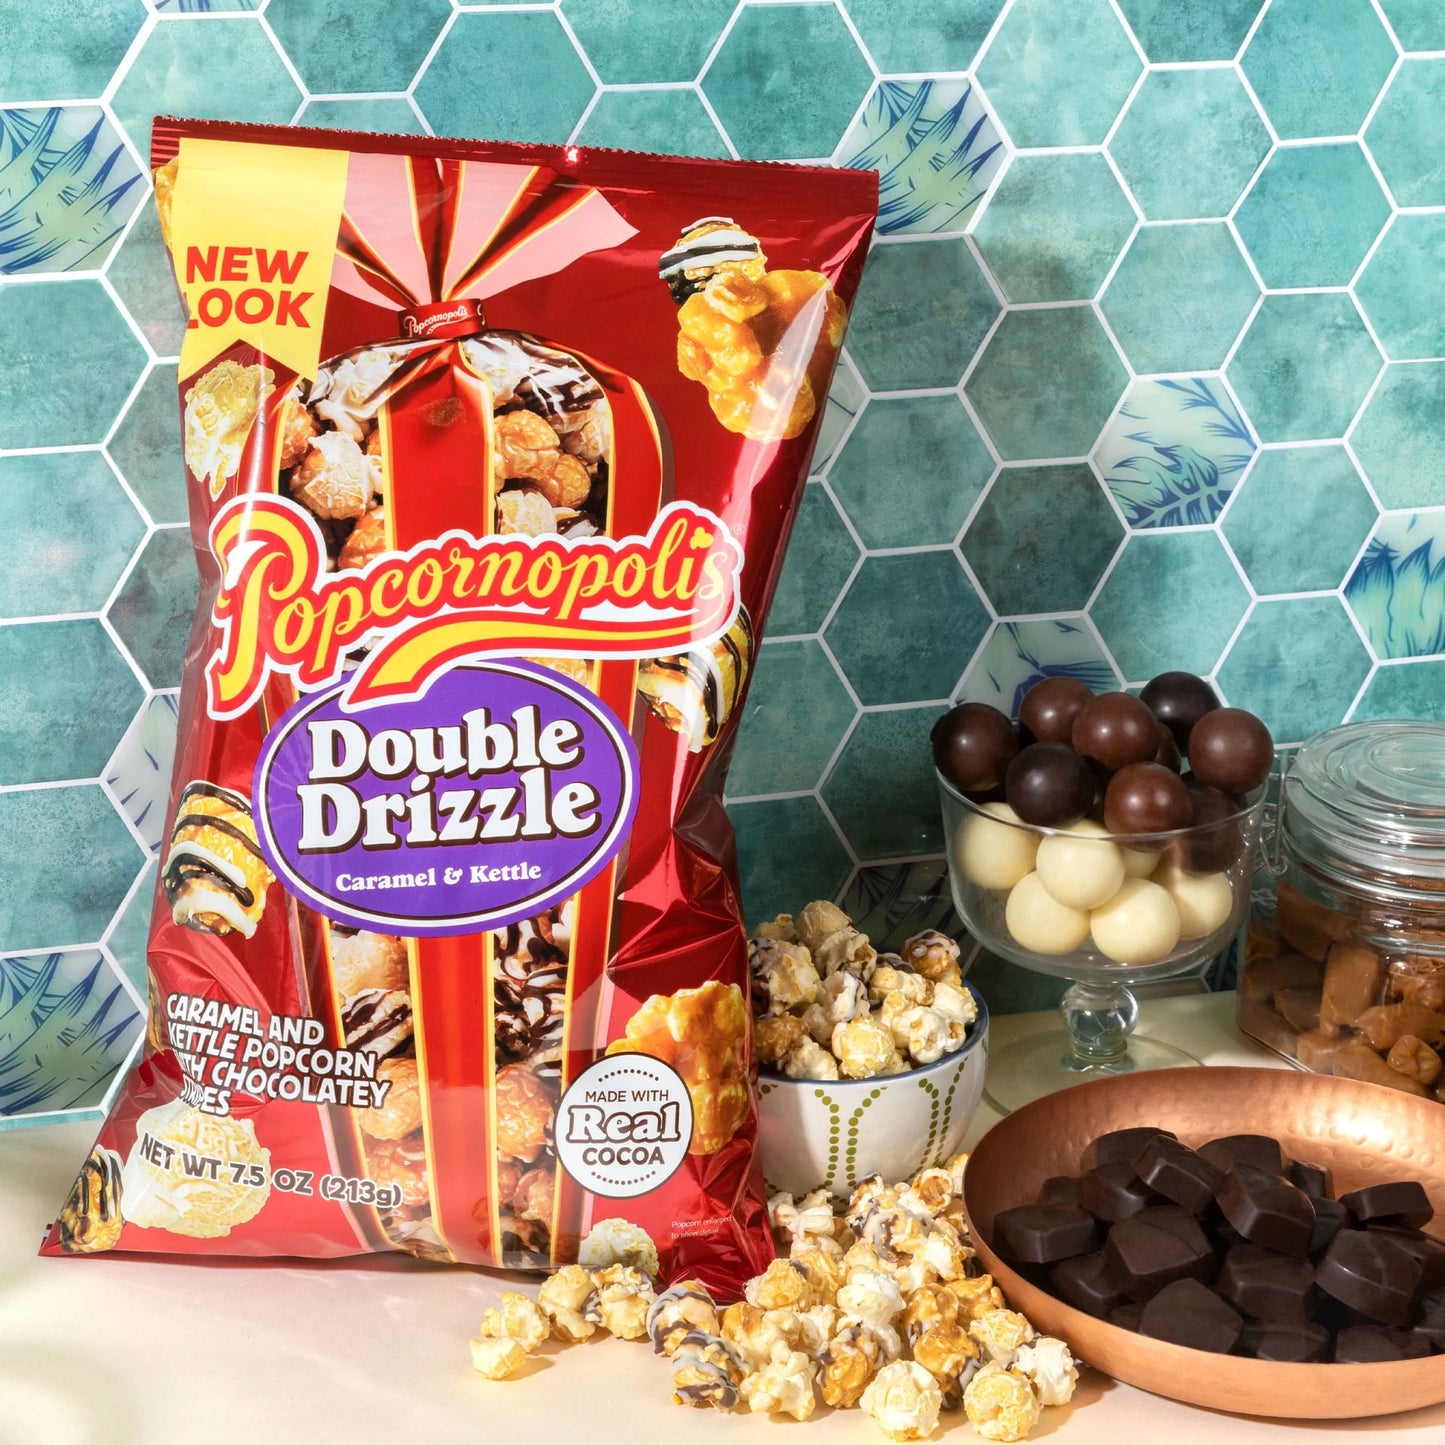 Double Drizzle Popcorn, Caramel & Kettle with Chocolatey Stripes, 7.5 Oz